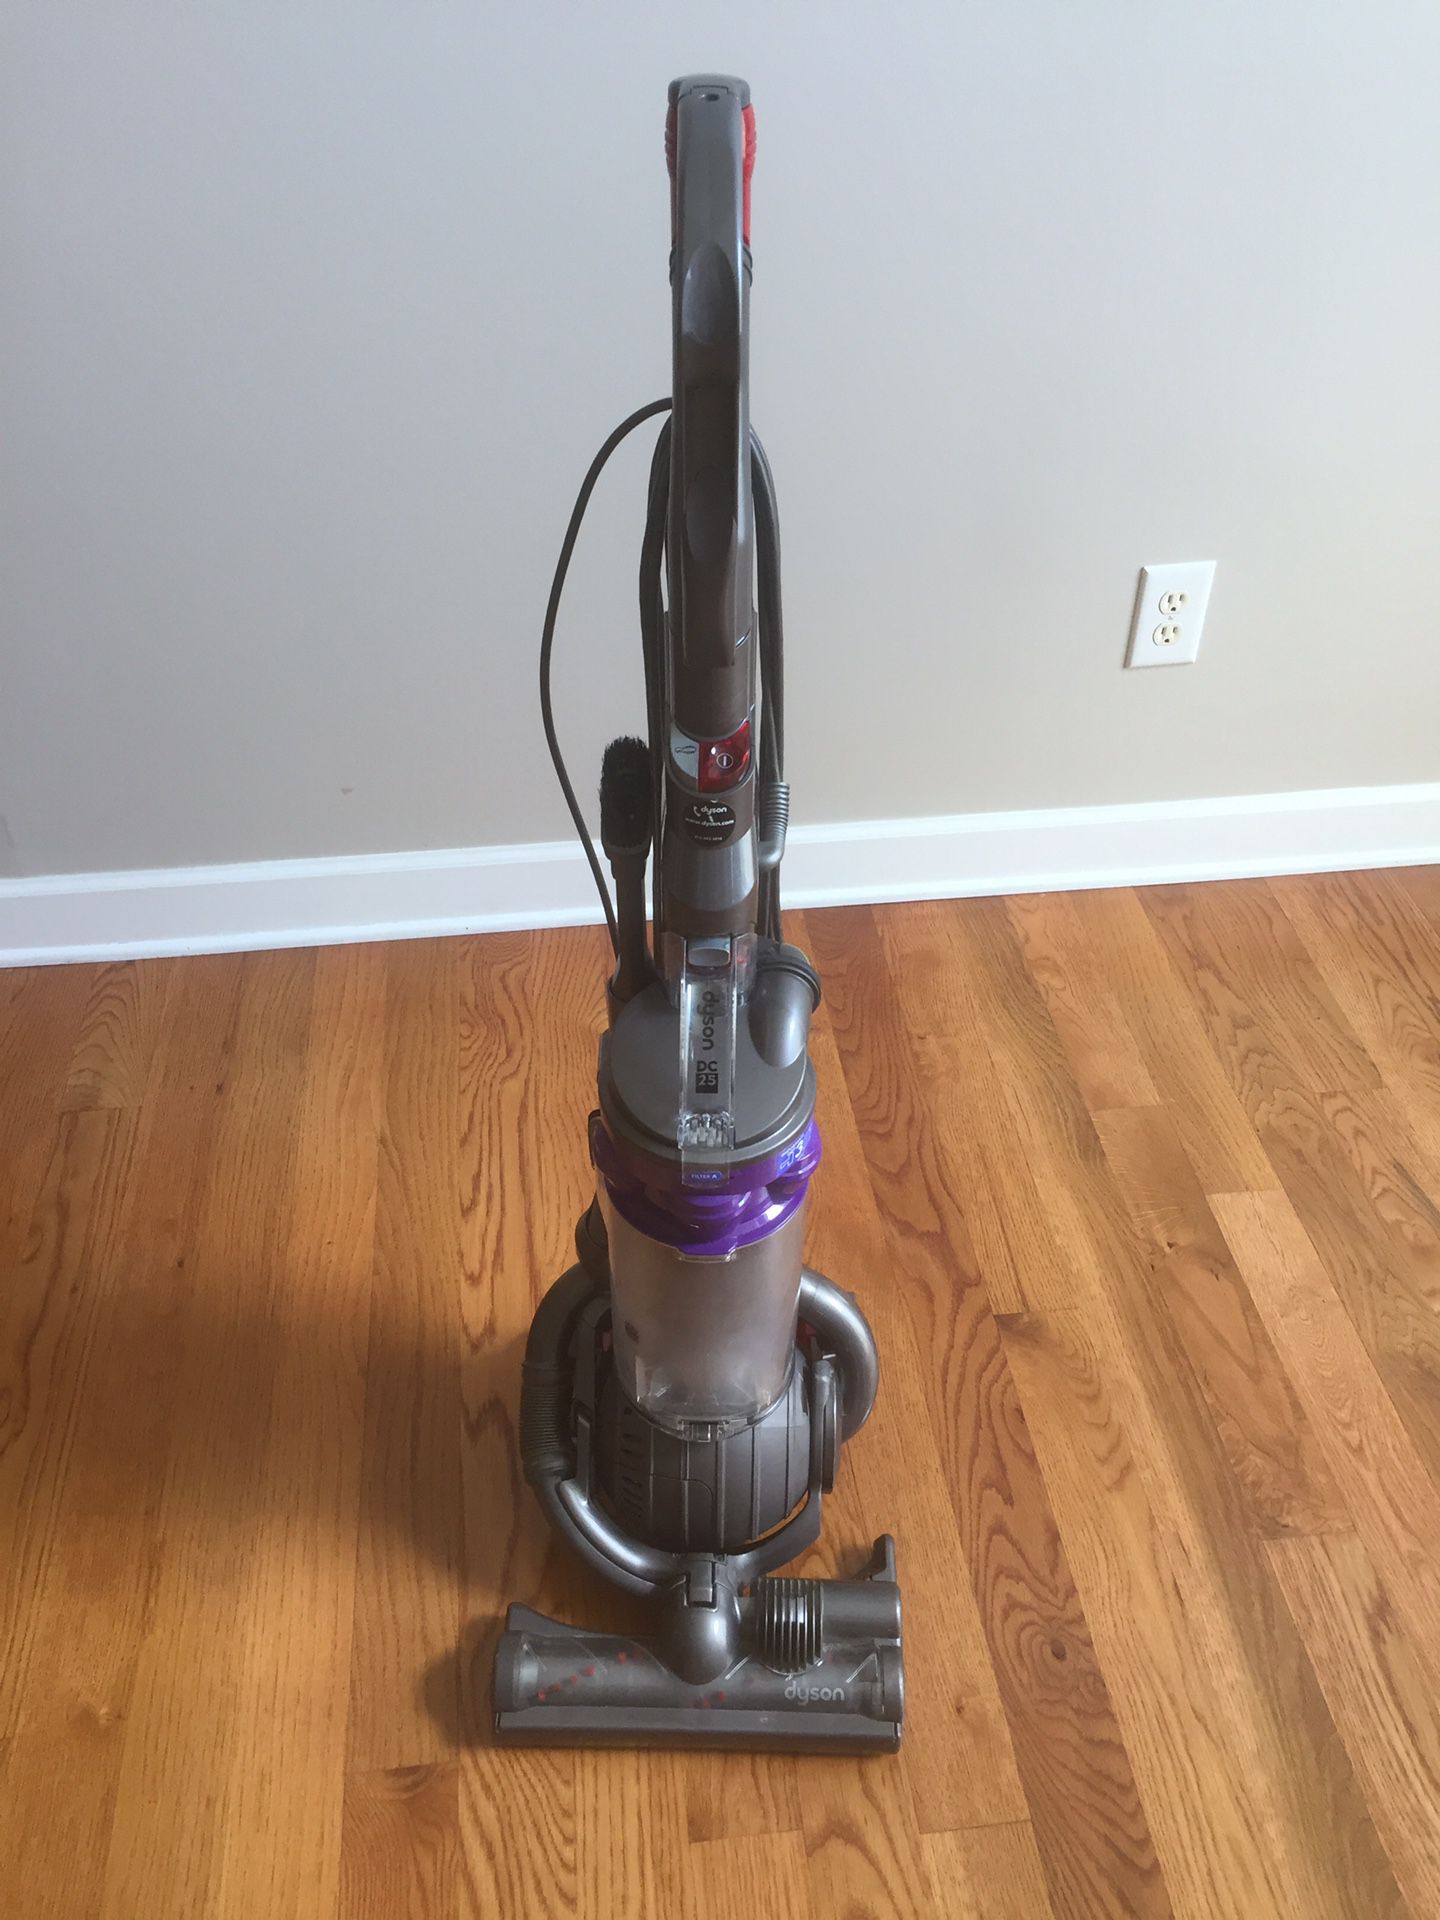 Dyson DC 25 rollerball vacuum with attachments great condition moving must sell can be picked up in Columbia about a mile from the speedway gas stati